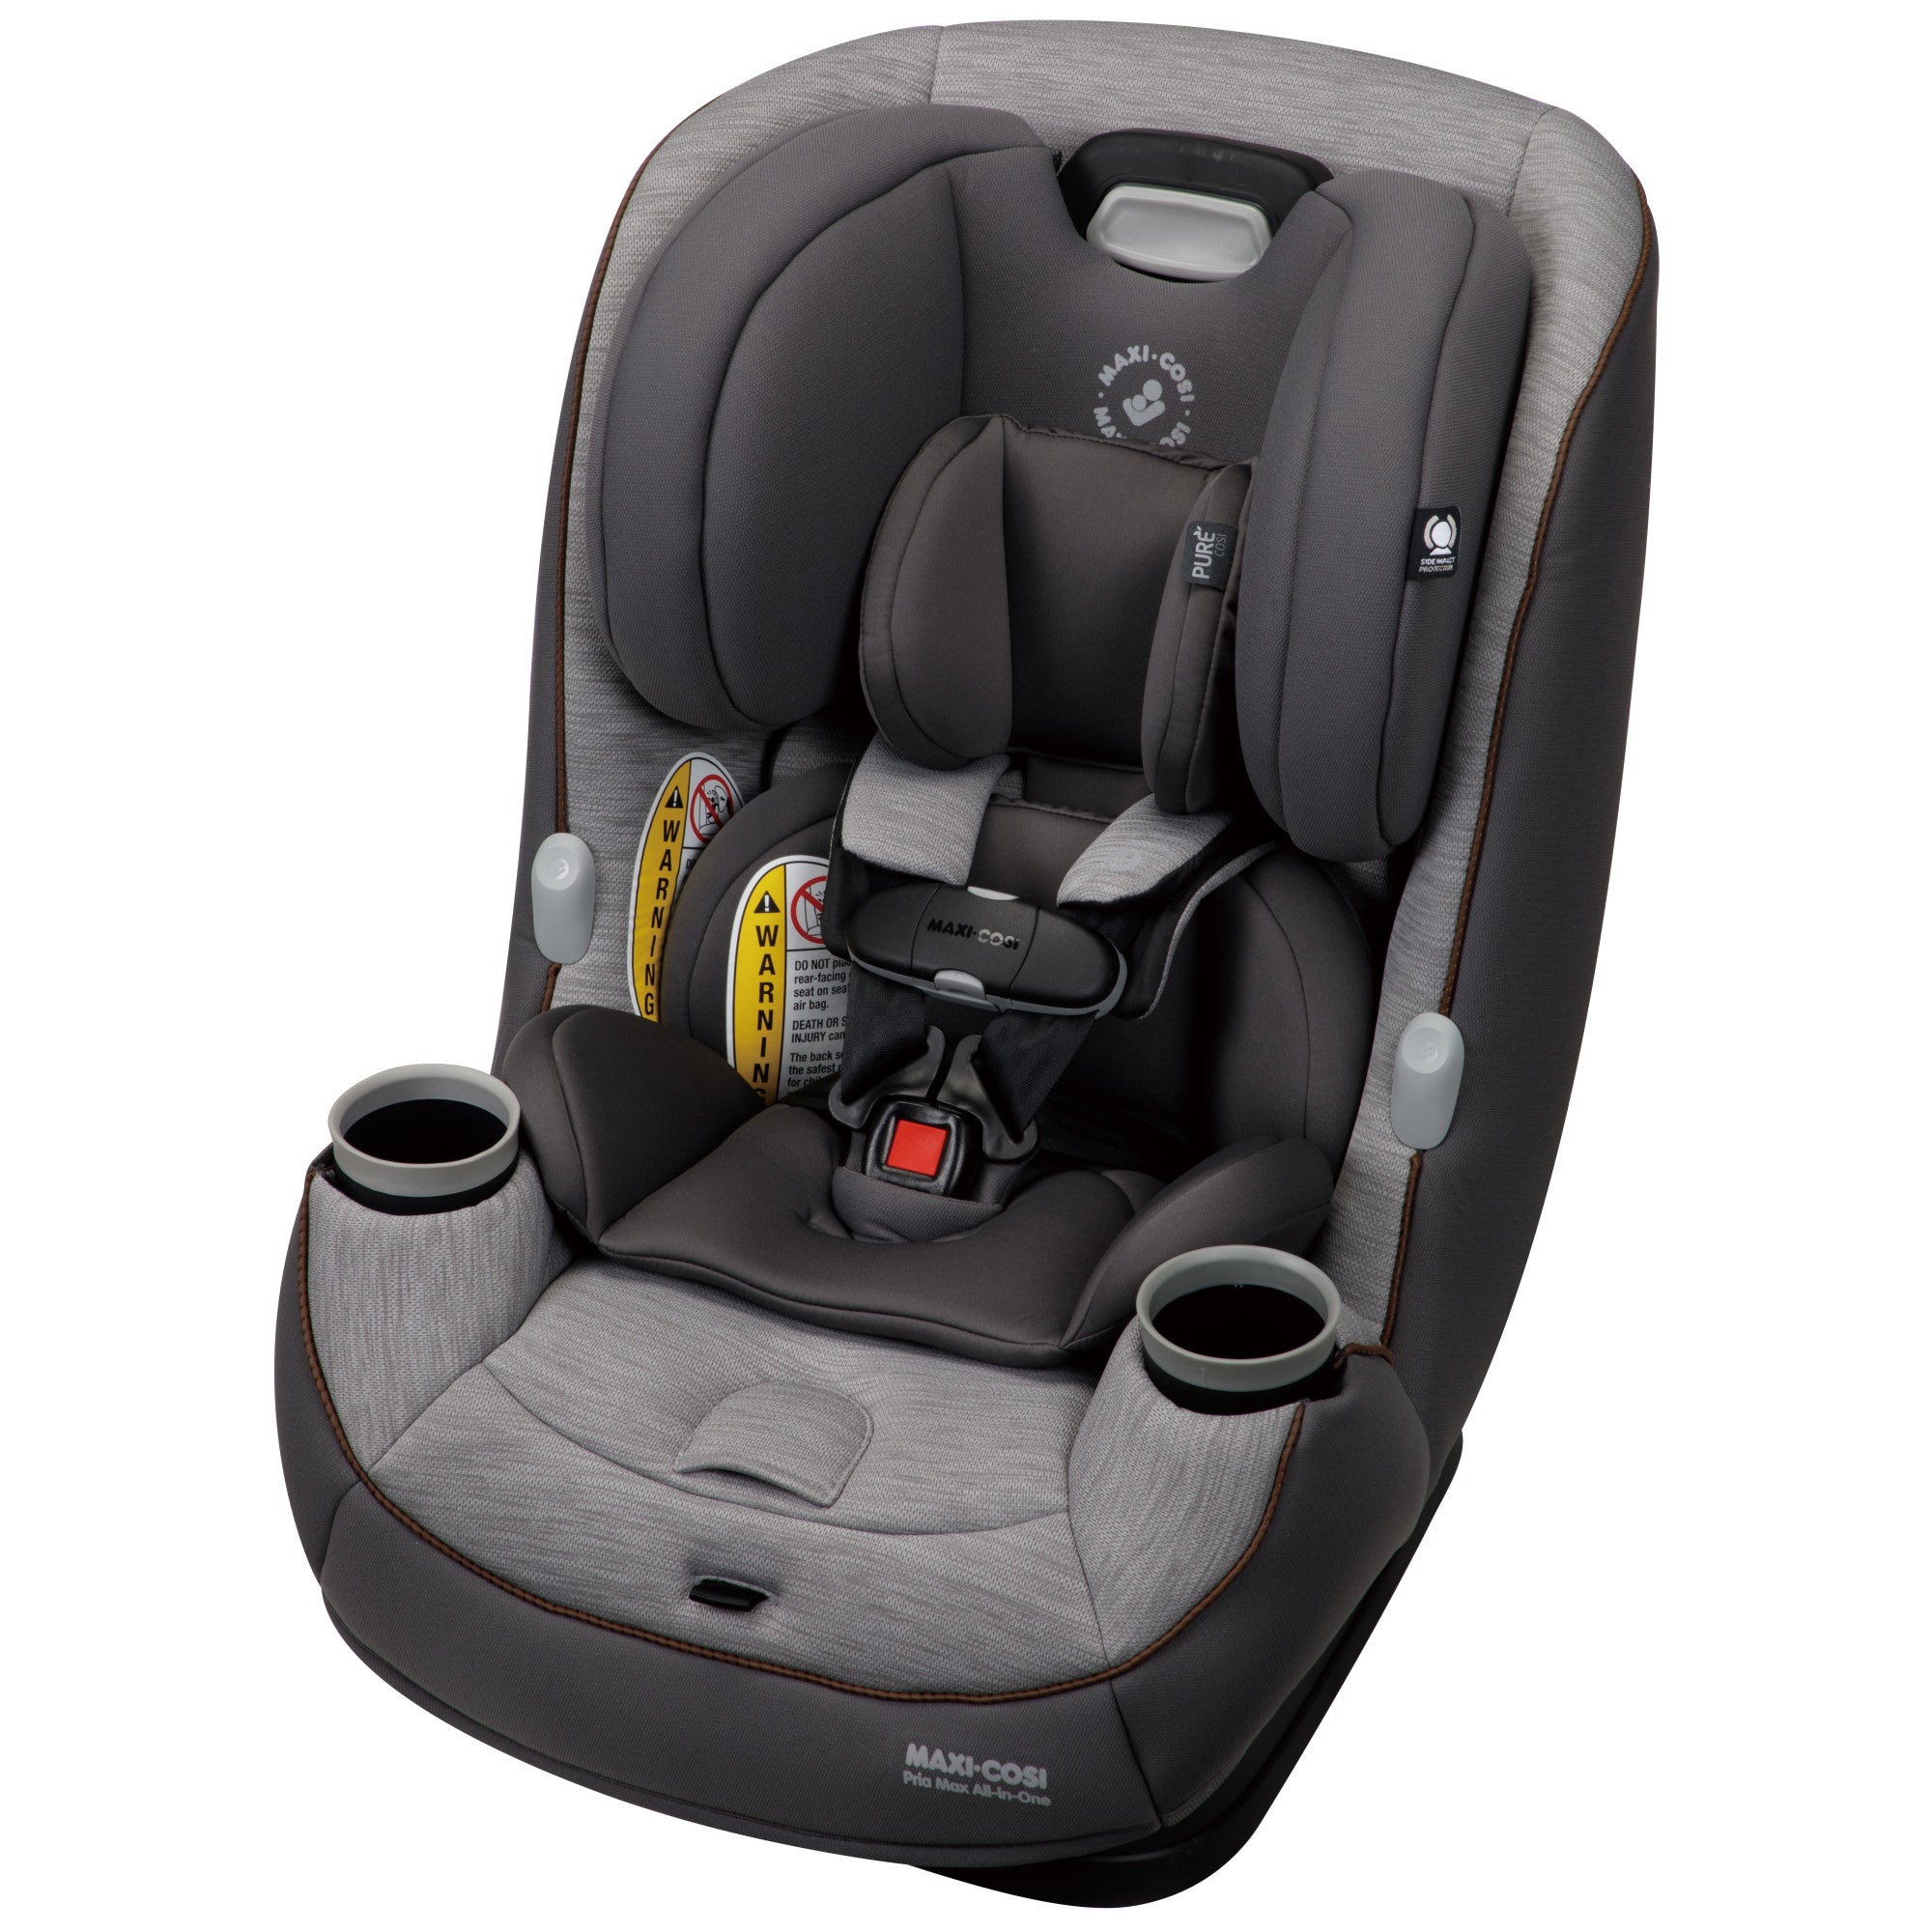 Pria™ Max All-in-One Convertible Car Seat - Urban Wonder - 45 degree angle view of left side